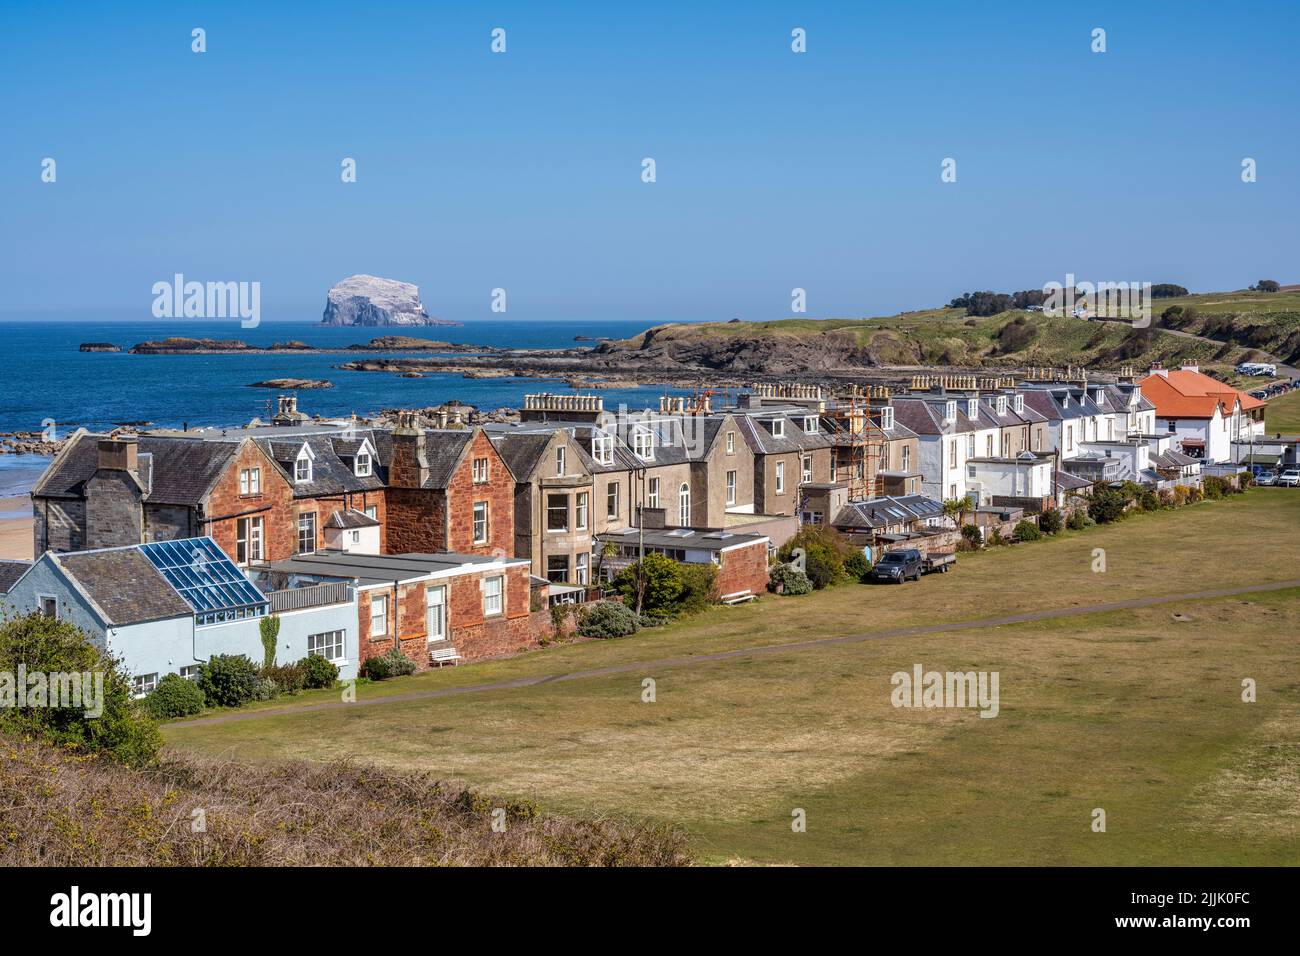 Houses on Marine Parade, with Bass Rock seabird colony in distance, on seafront of coastal town of North Berwick in East Lothian, Scotland, UK Stock Photo